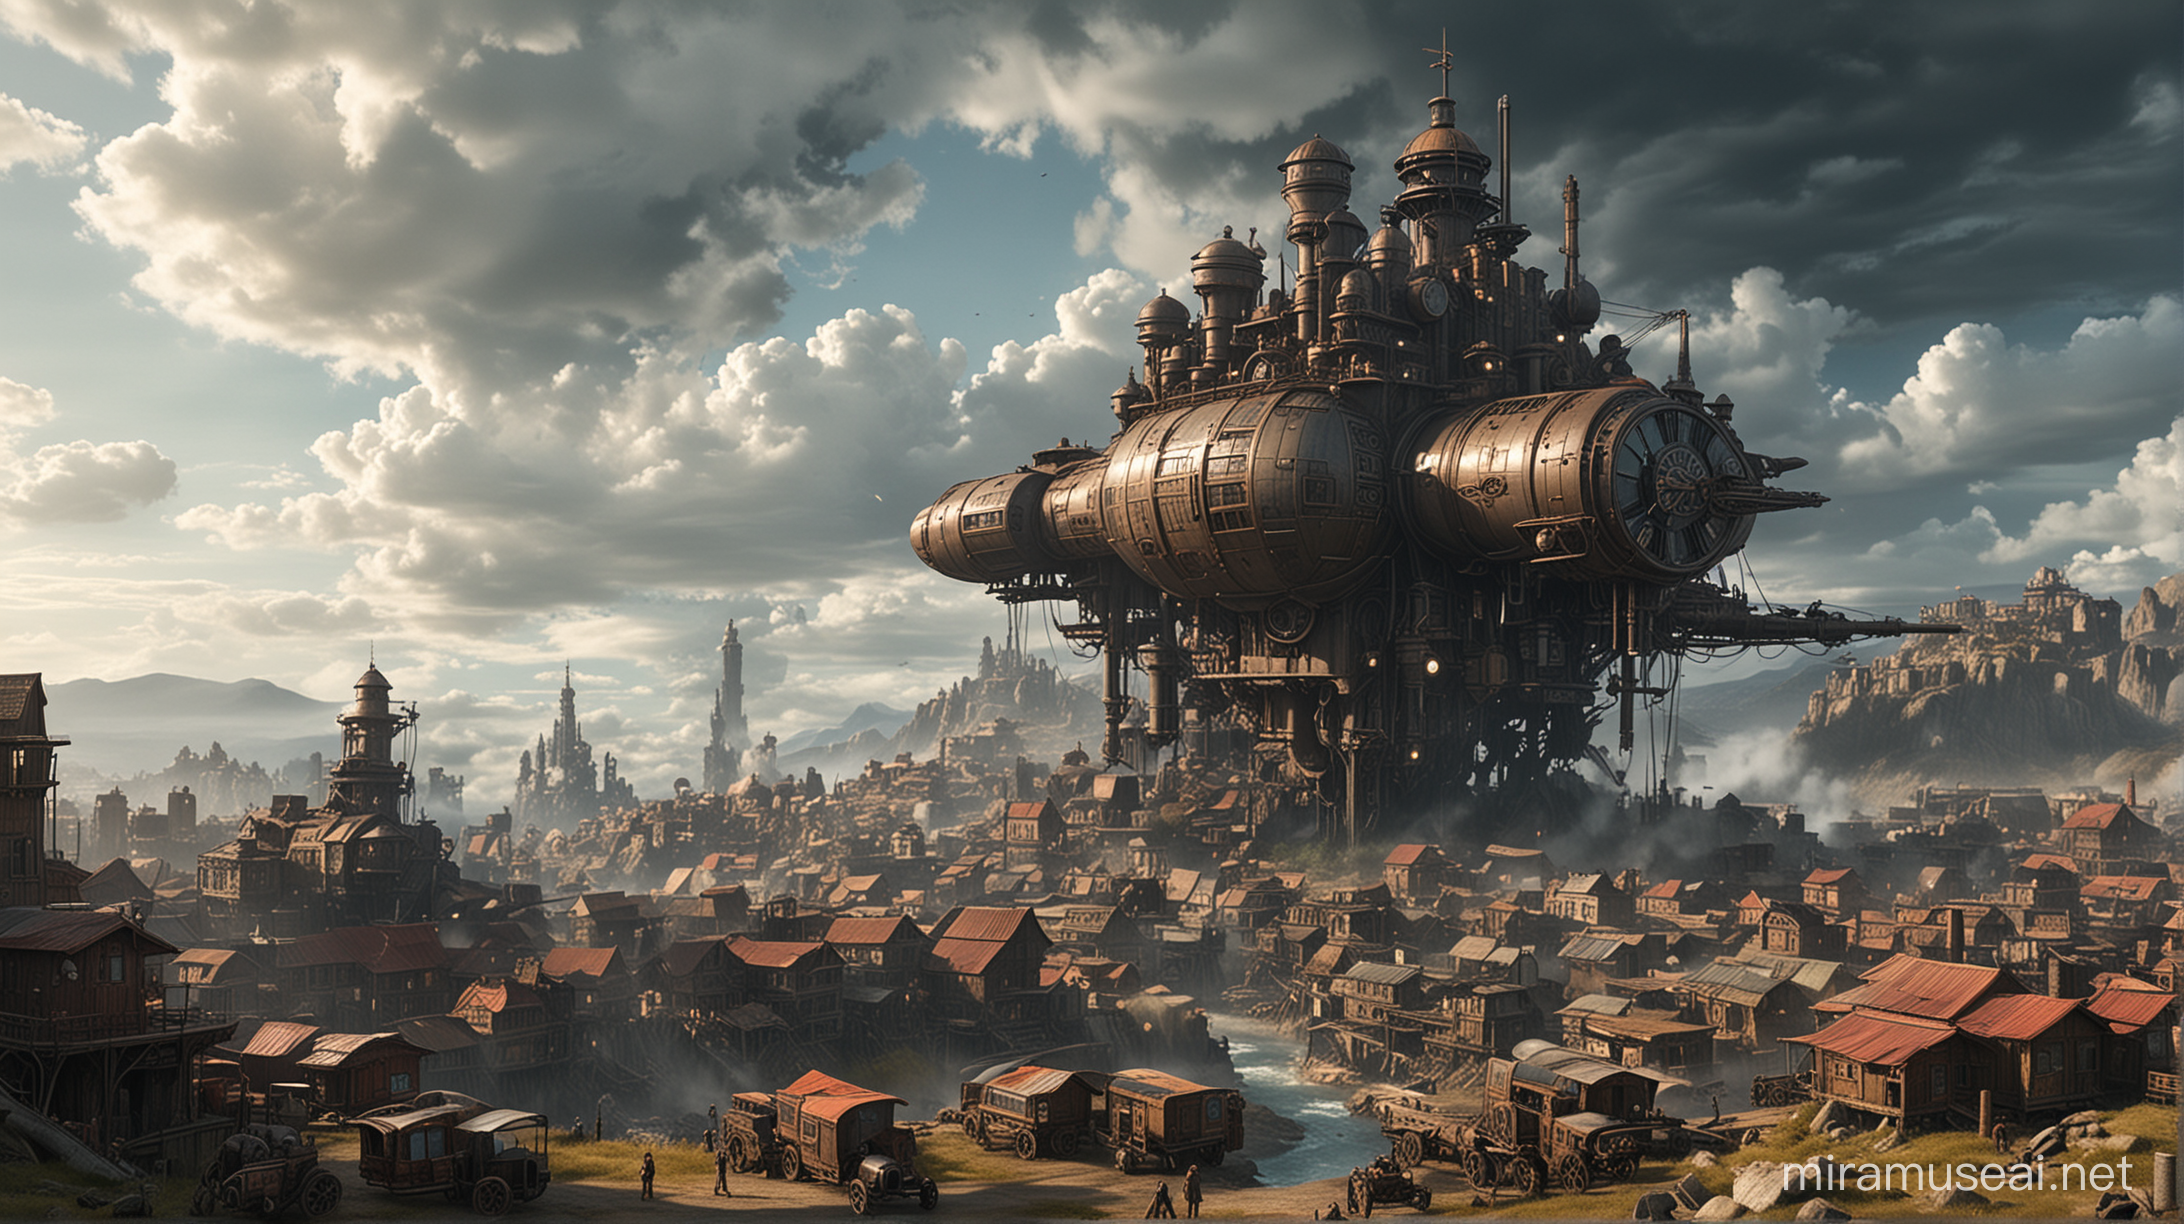 mobile steampunk city in style of Mortal Engines runs through wilderness, cloudy